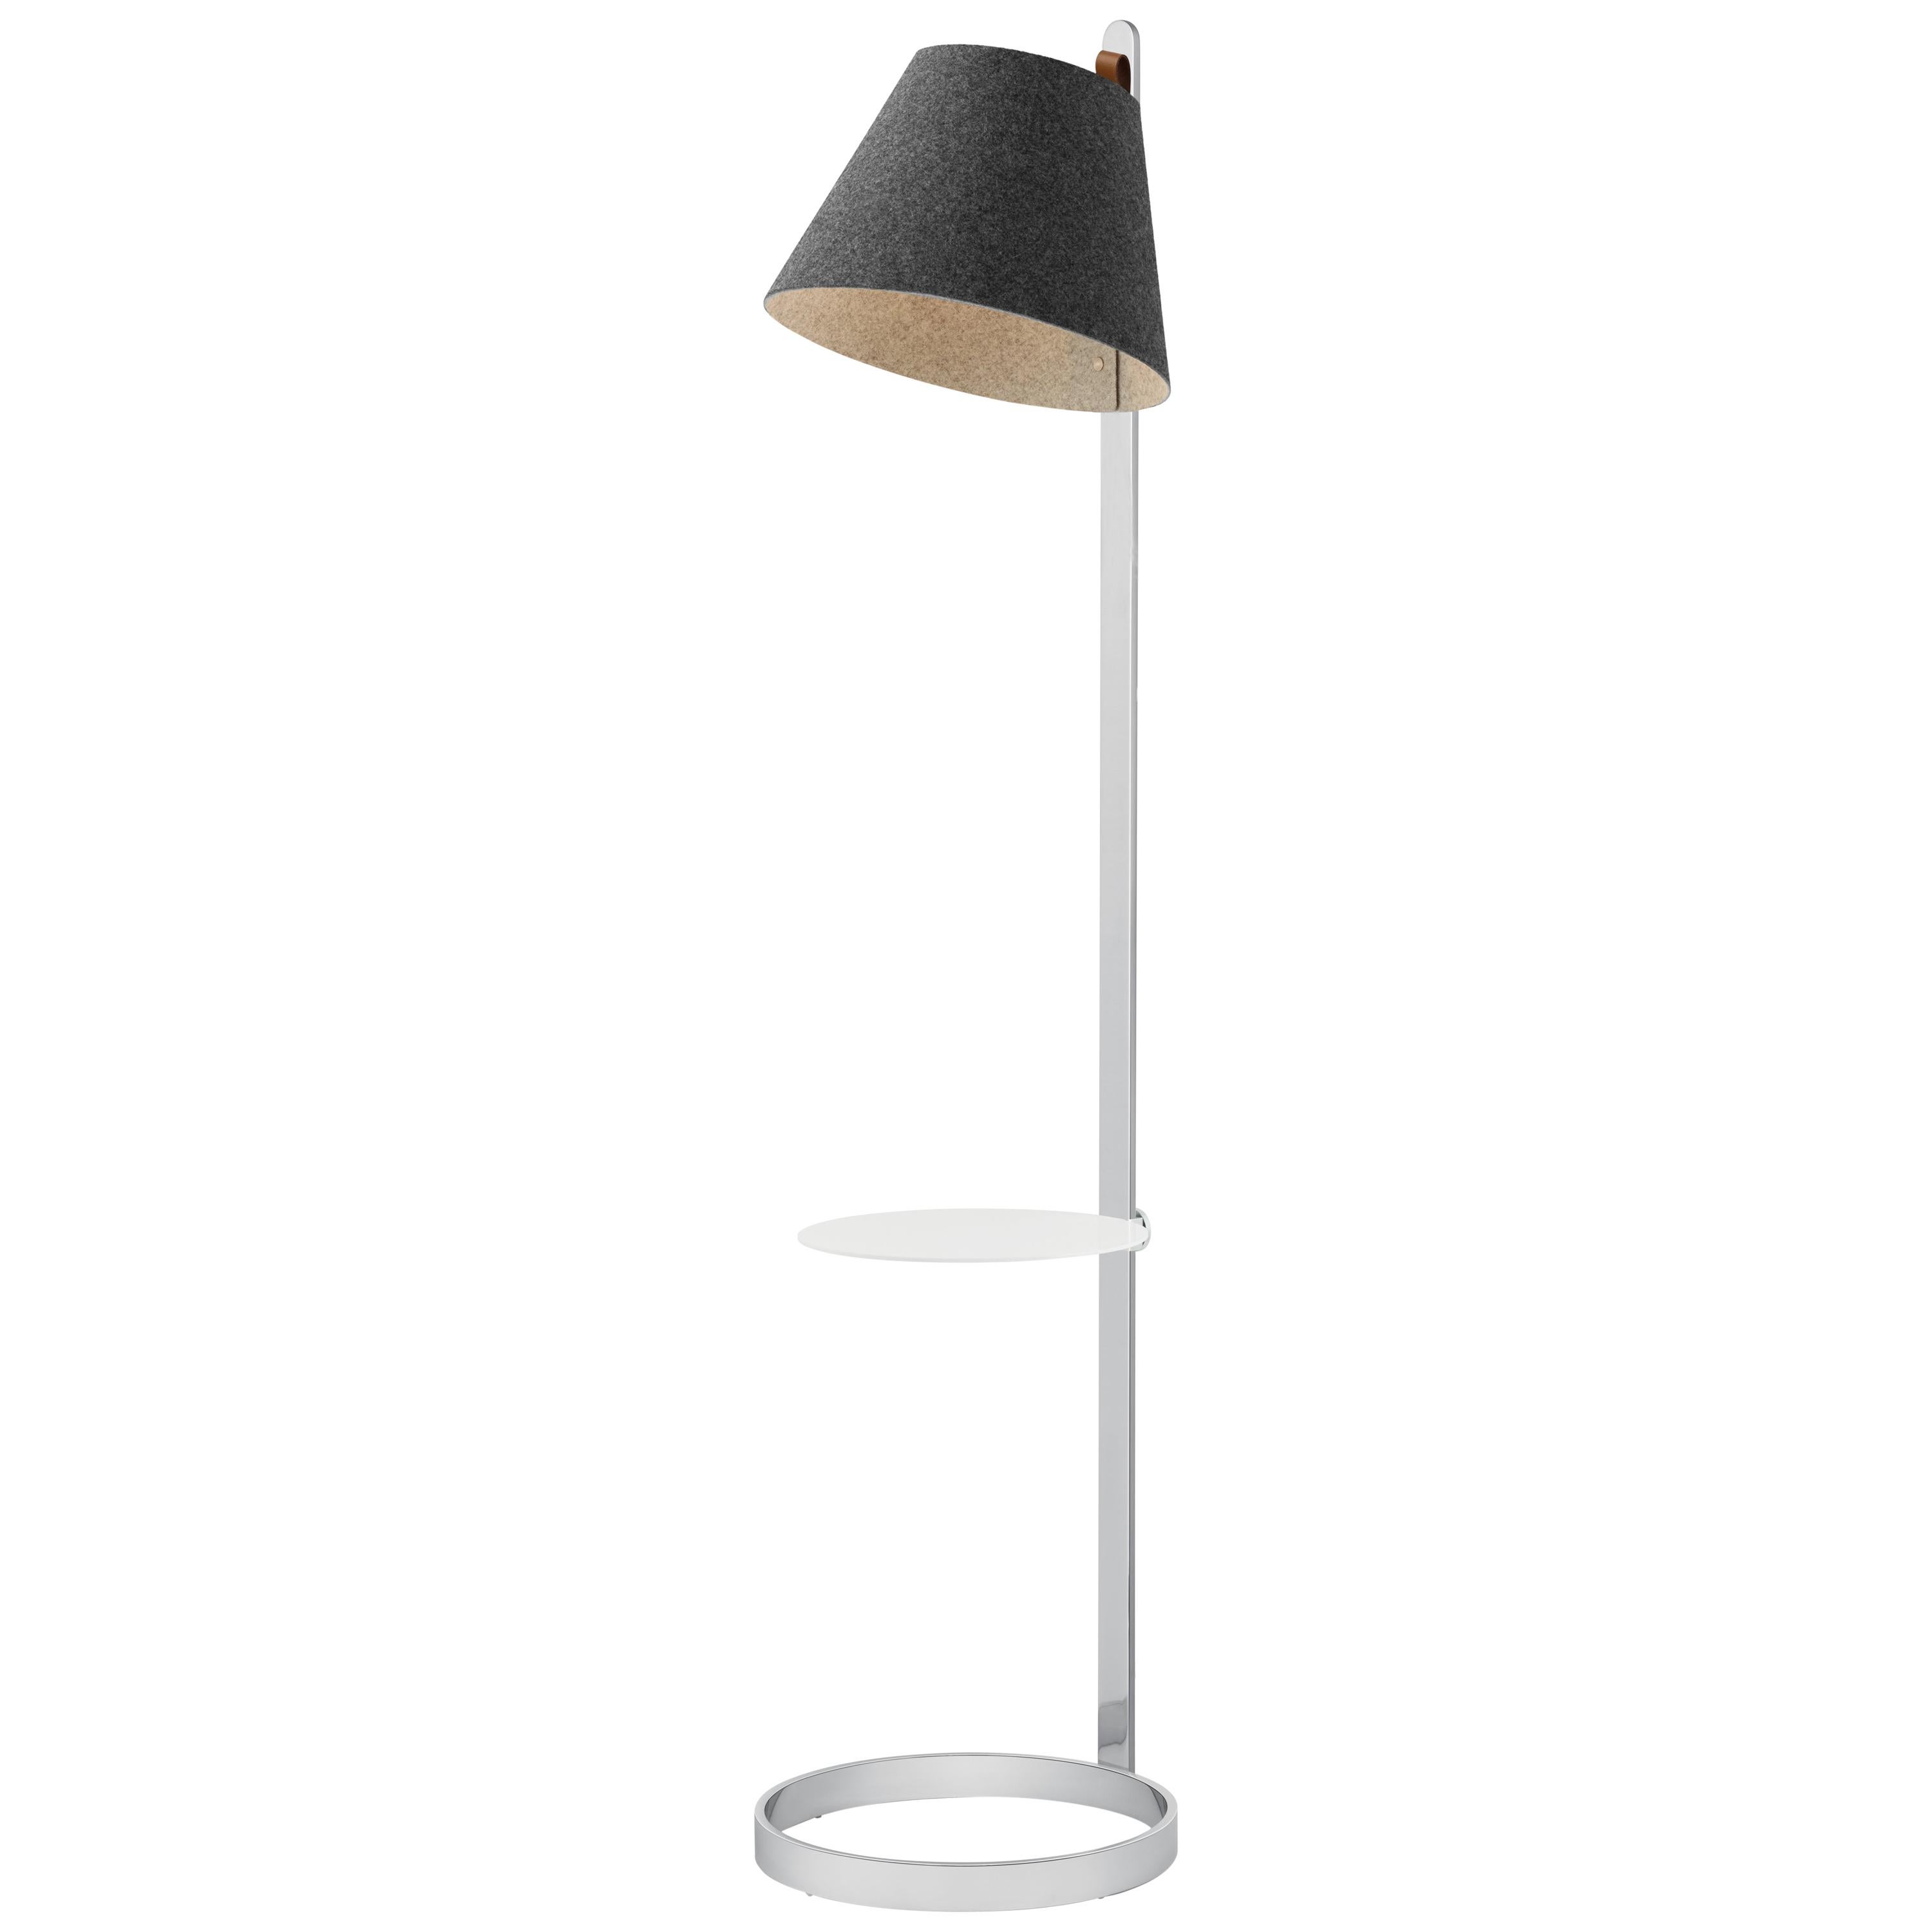 Lana Floor Lamp in Charcoal and Grey with Tray and Chrome Base by Pablo Designs